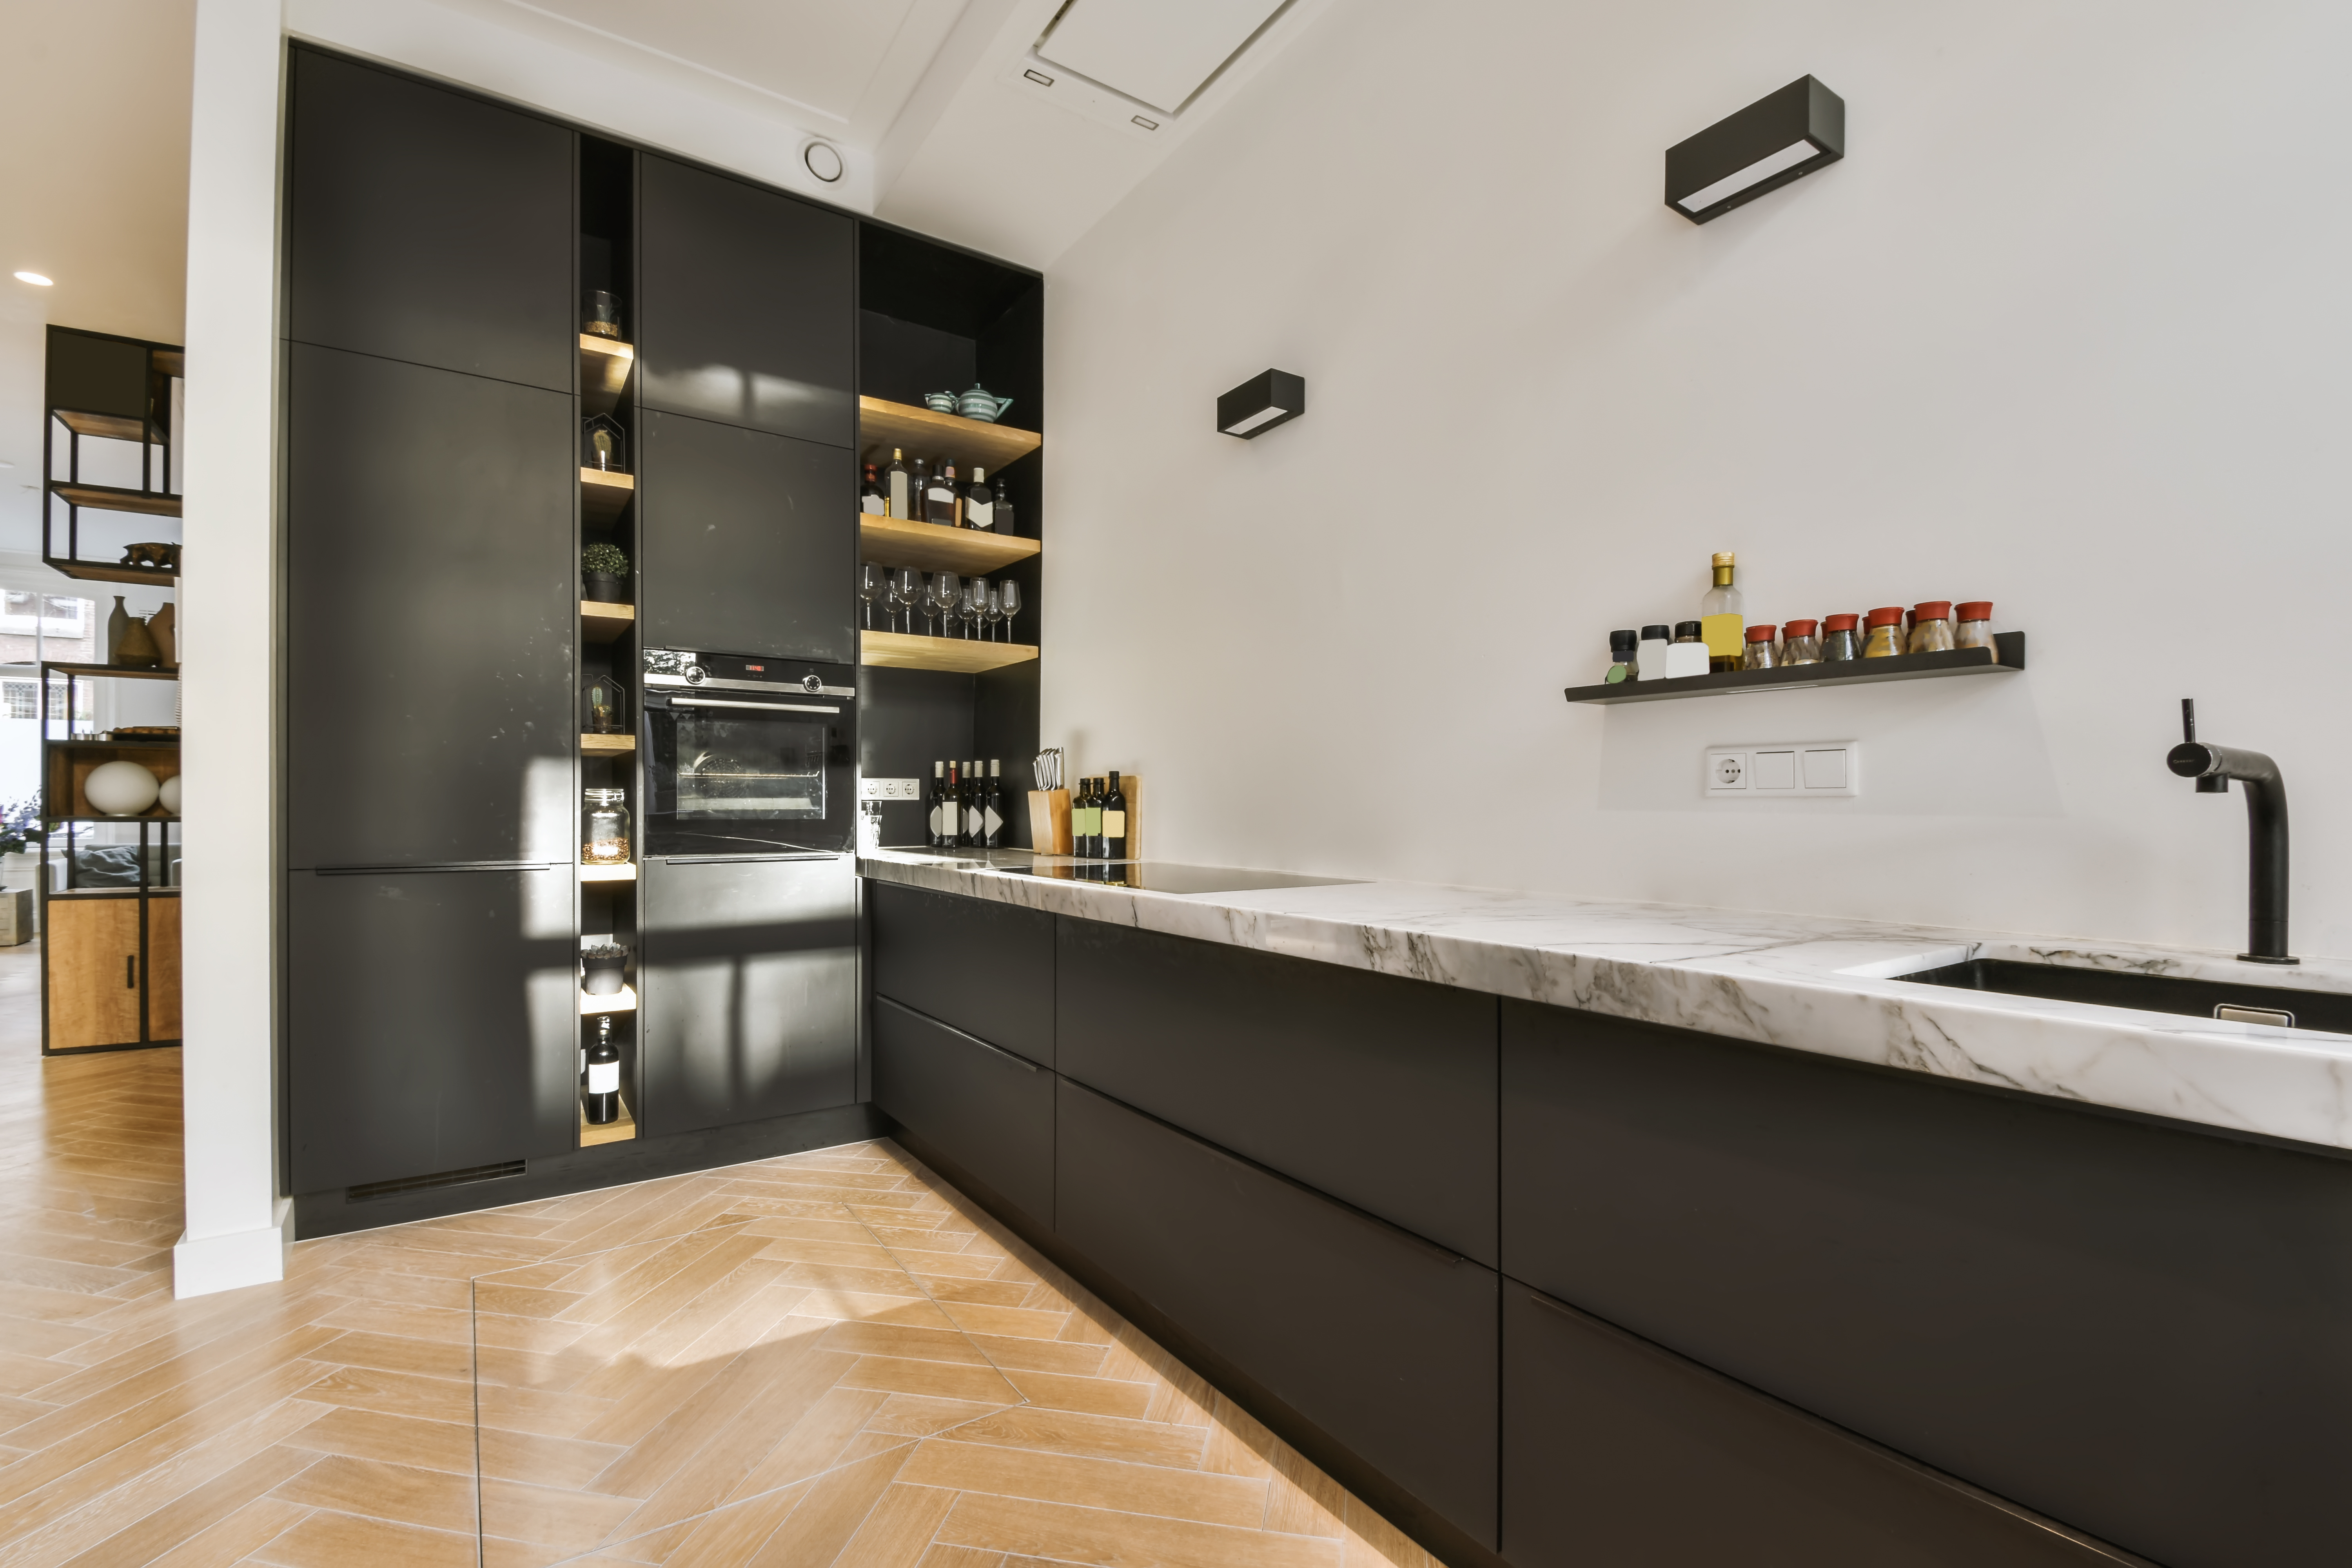 Bring Color to Your Kitchen Cabinets: Black- Kitchen Cabinet Designs